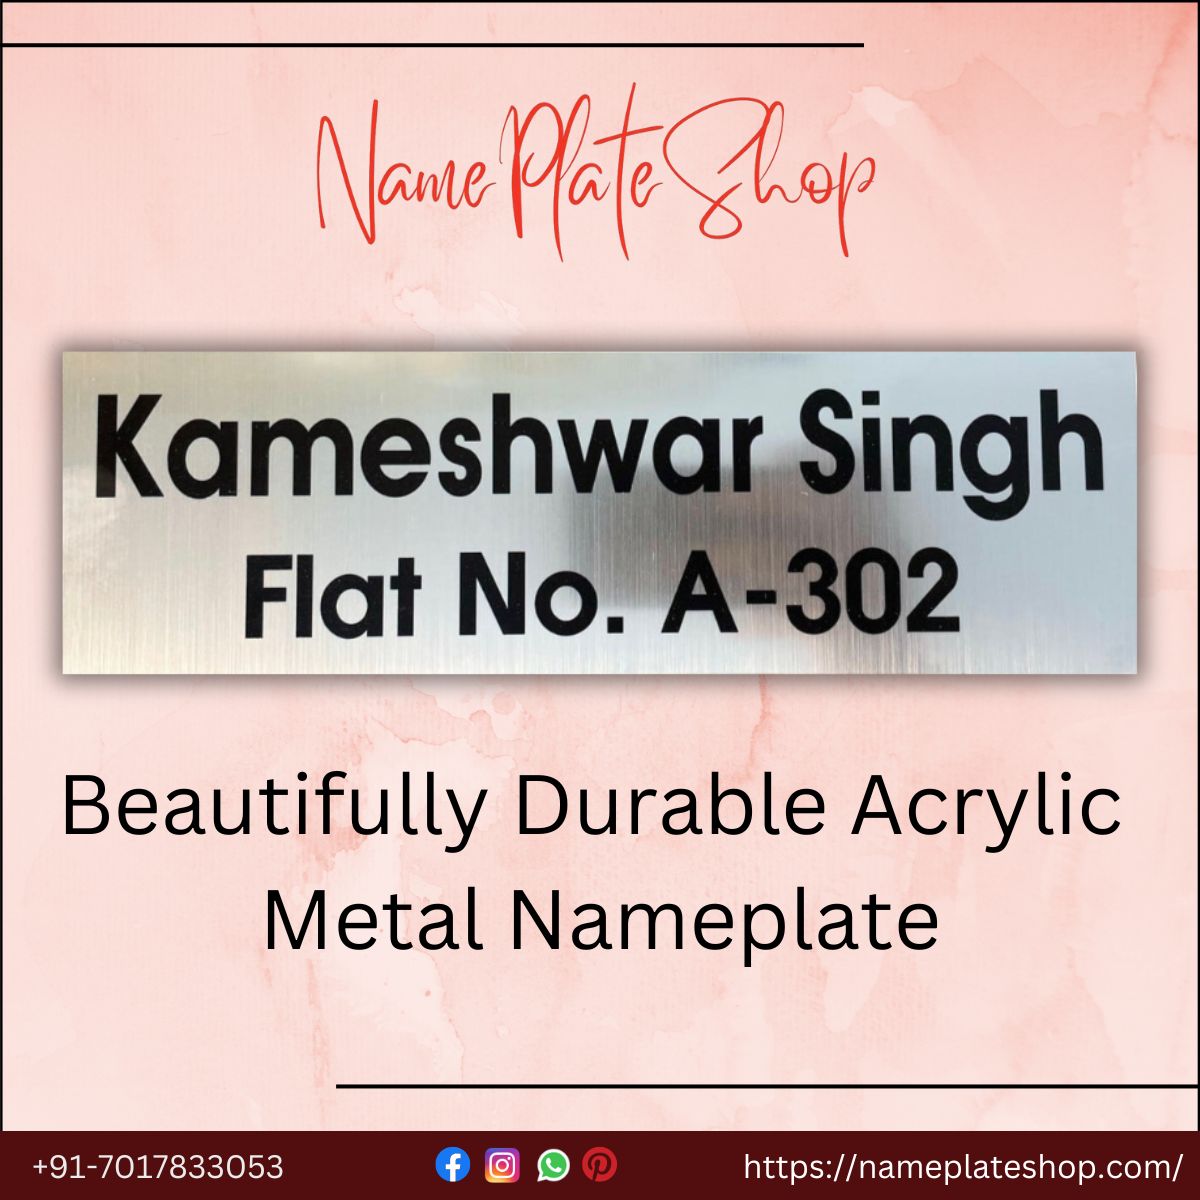 Discover Metal Nameplate Excellence At Nameplateshop